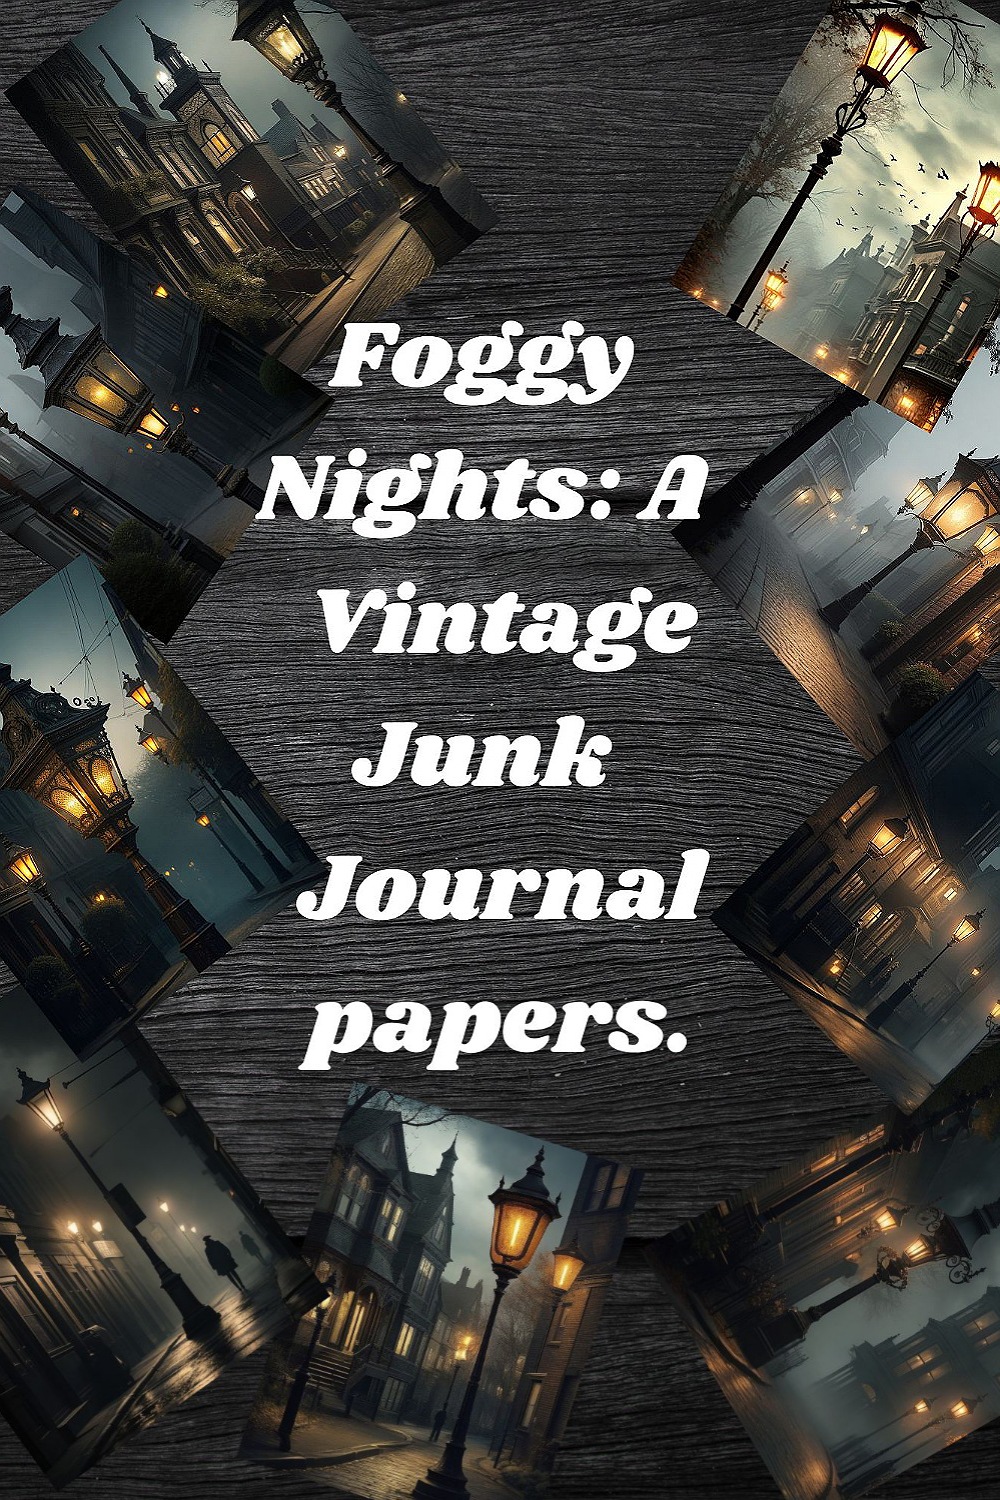 Foggy Nights: A vintage junk journal papers pinterest preview image.